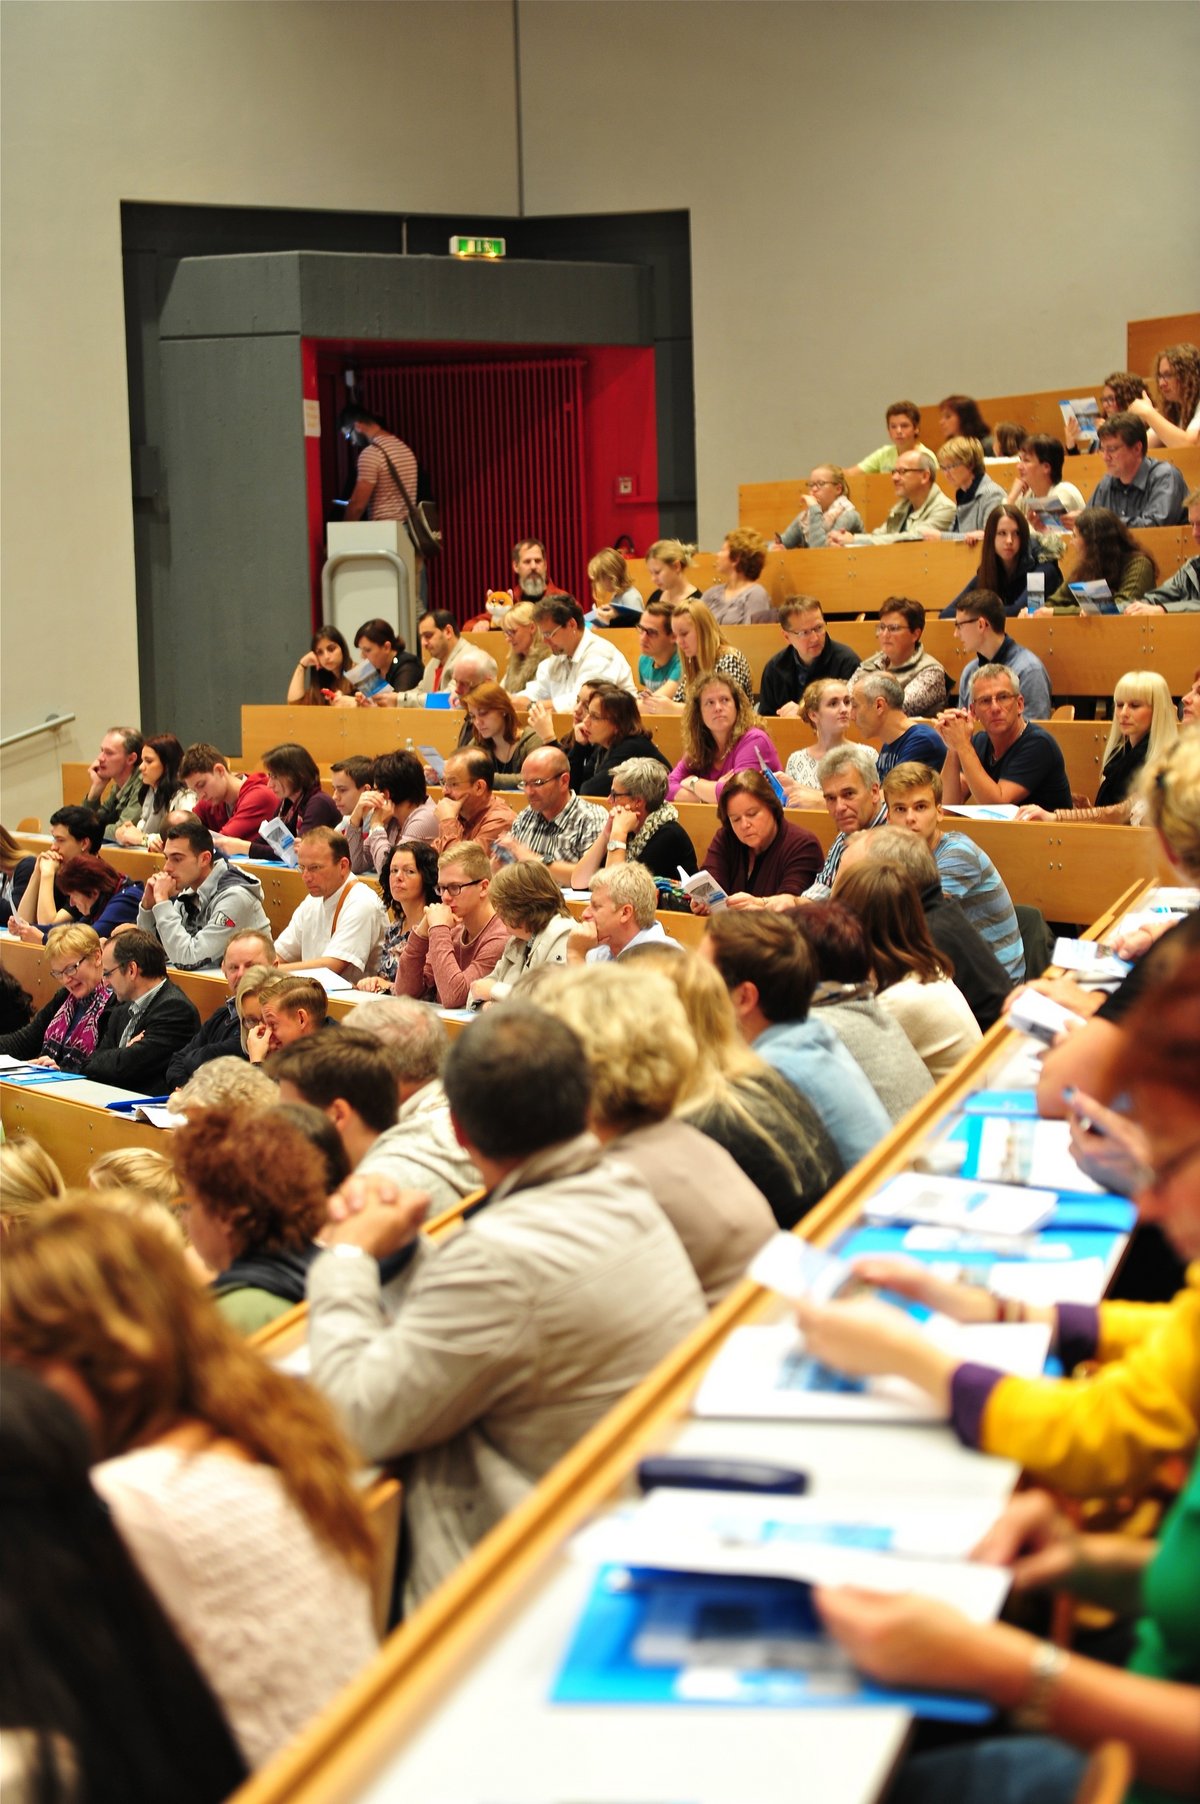 Students take part in a larger lecture in the university auditorium